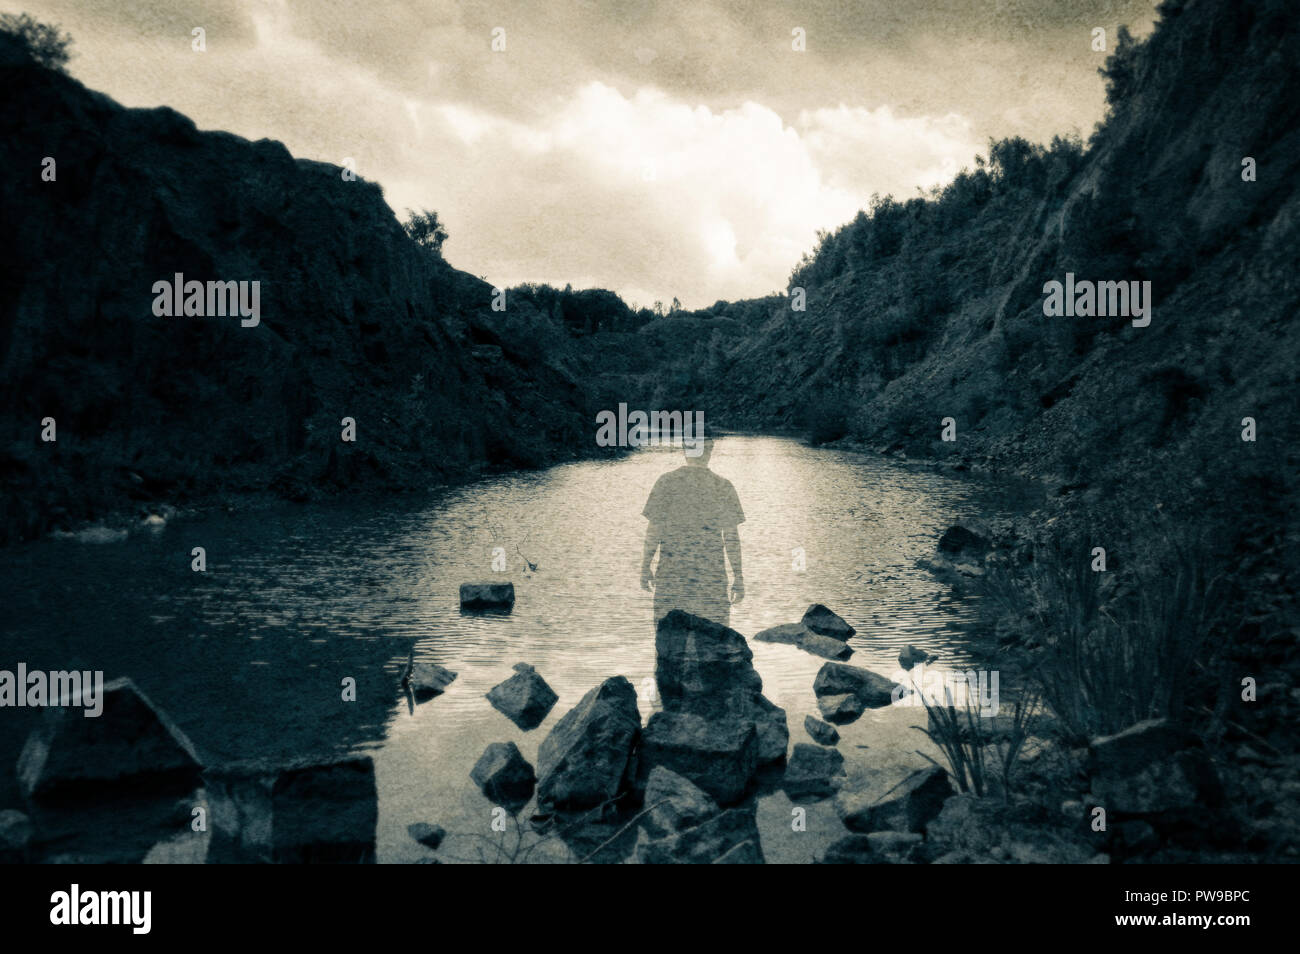 A ghostly transparent figure standing on rocks looking out across a quarry lake surrounded by cliffs. With a muted edit Stock Photo